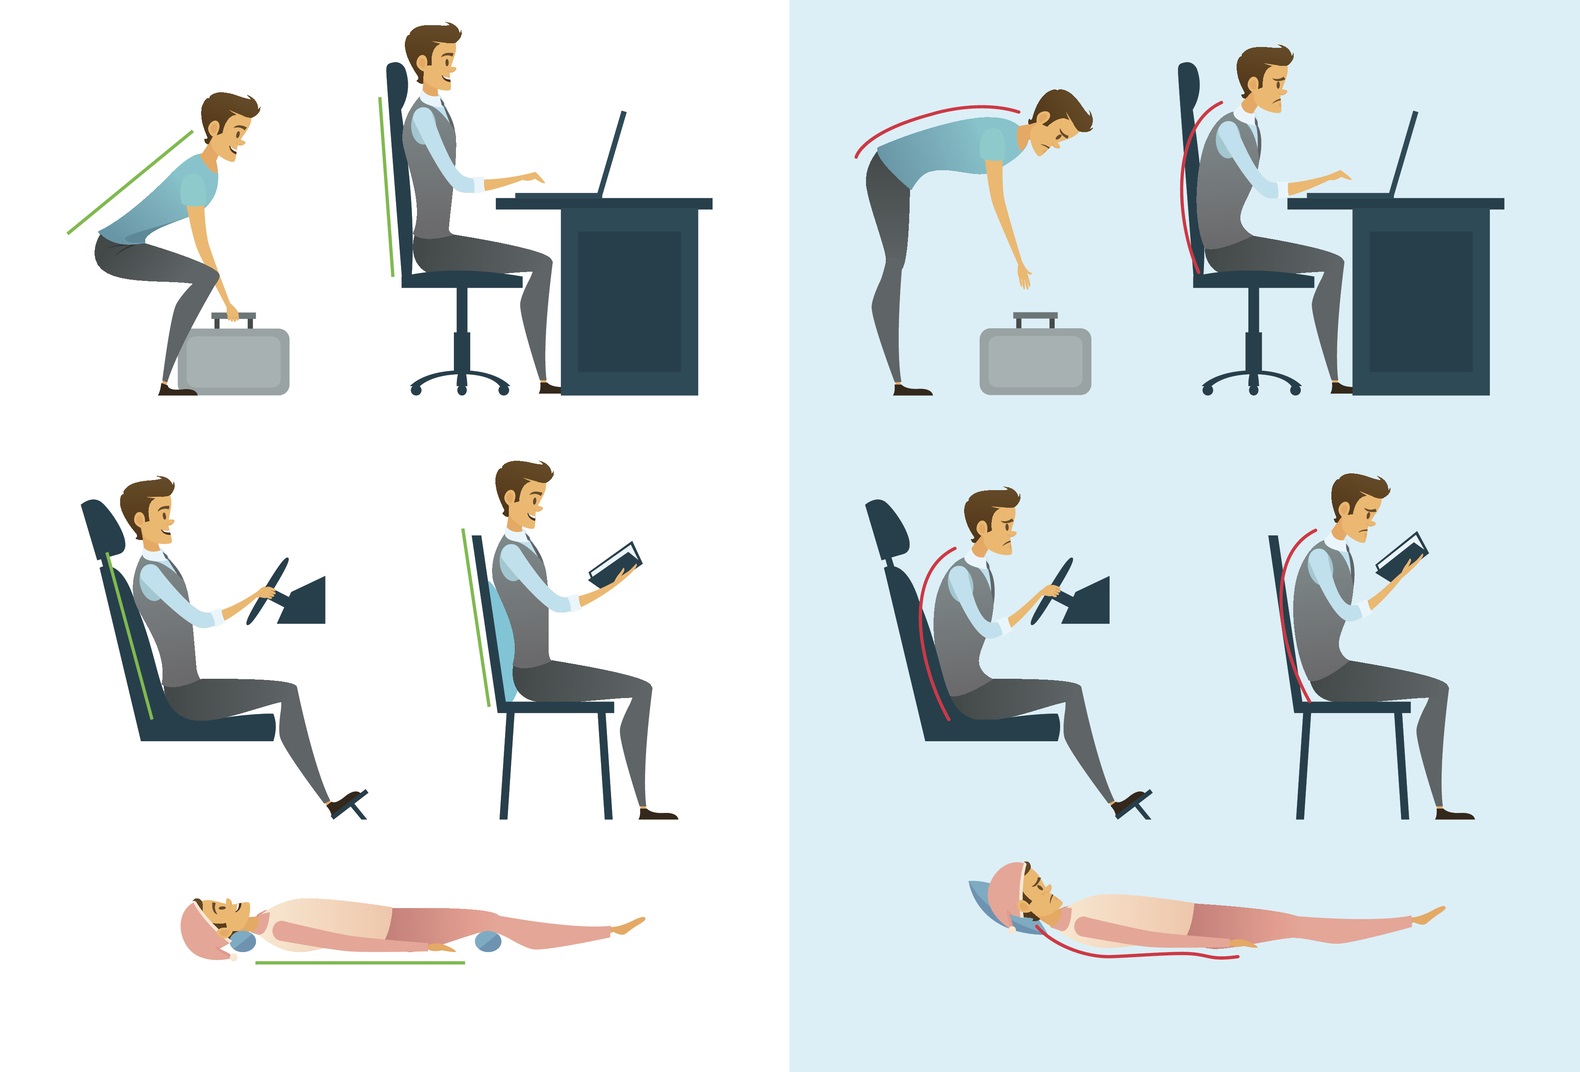 When the need for good workplace ergonomics is met, workplace safety and pr...